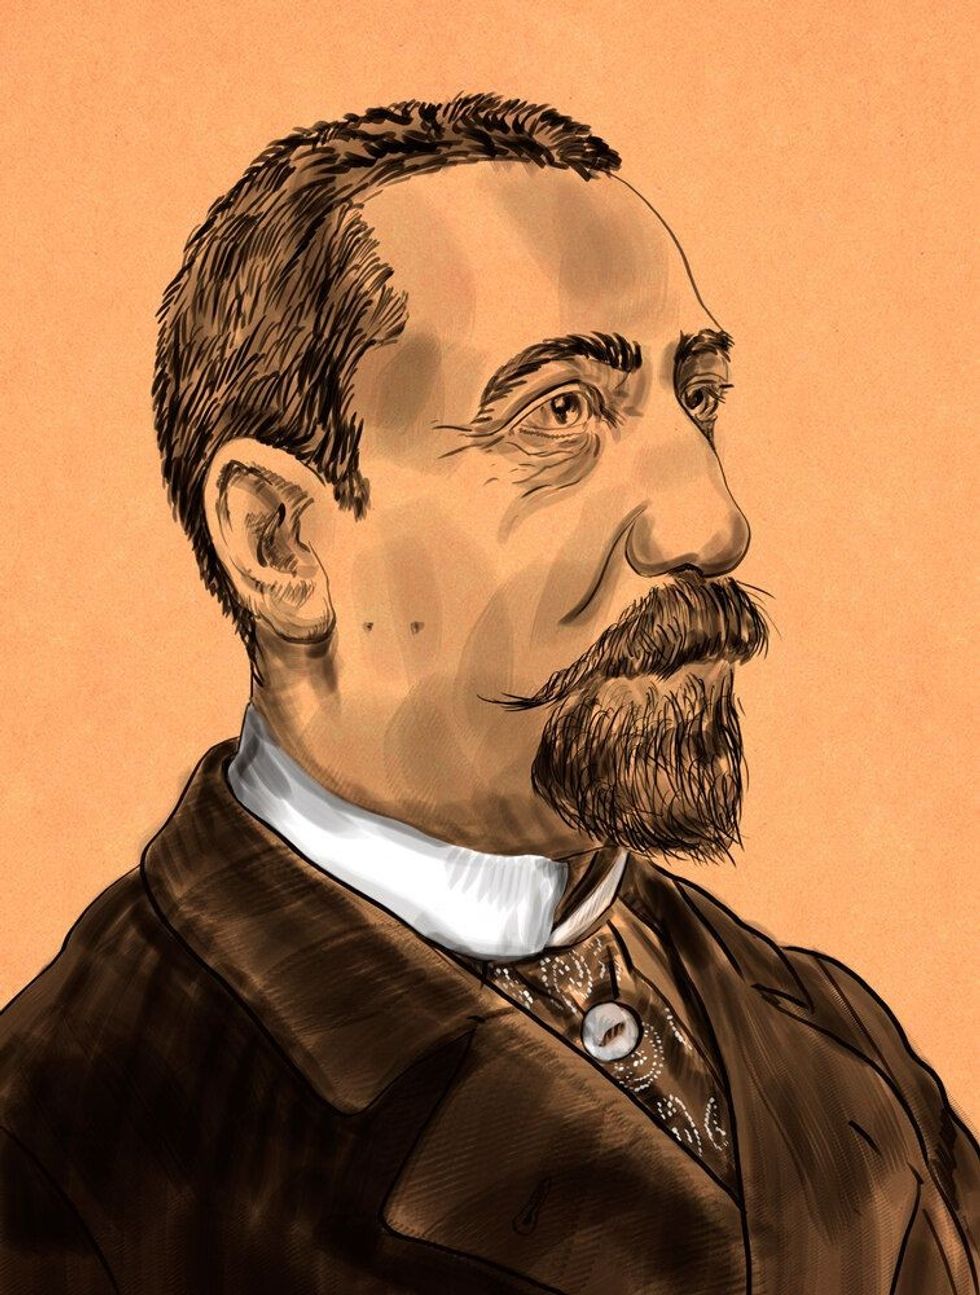 Anatole France was a French poet, journalist, and novelist with several best-sellers.